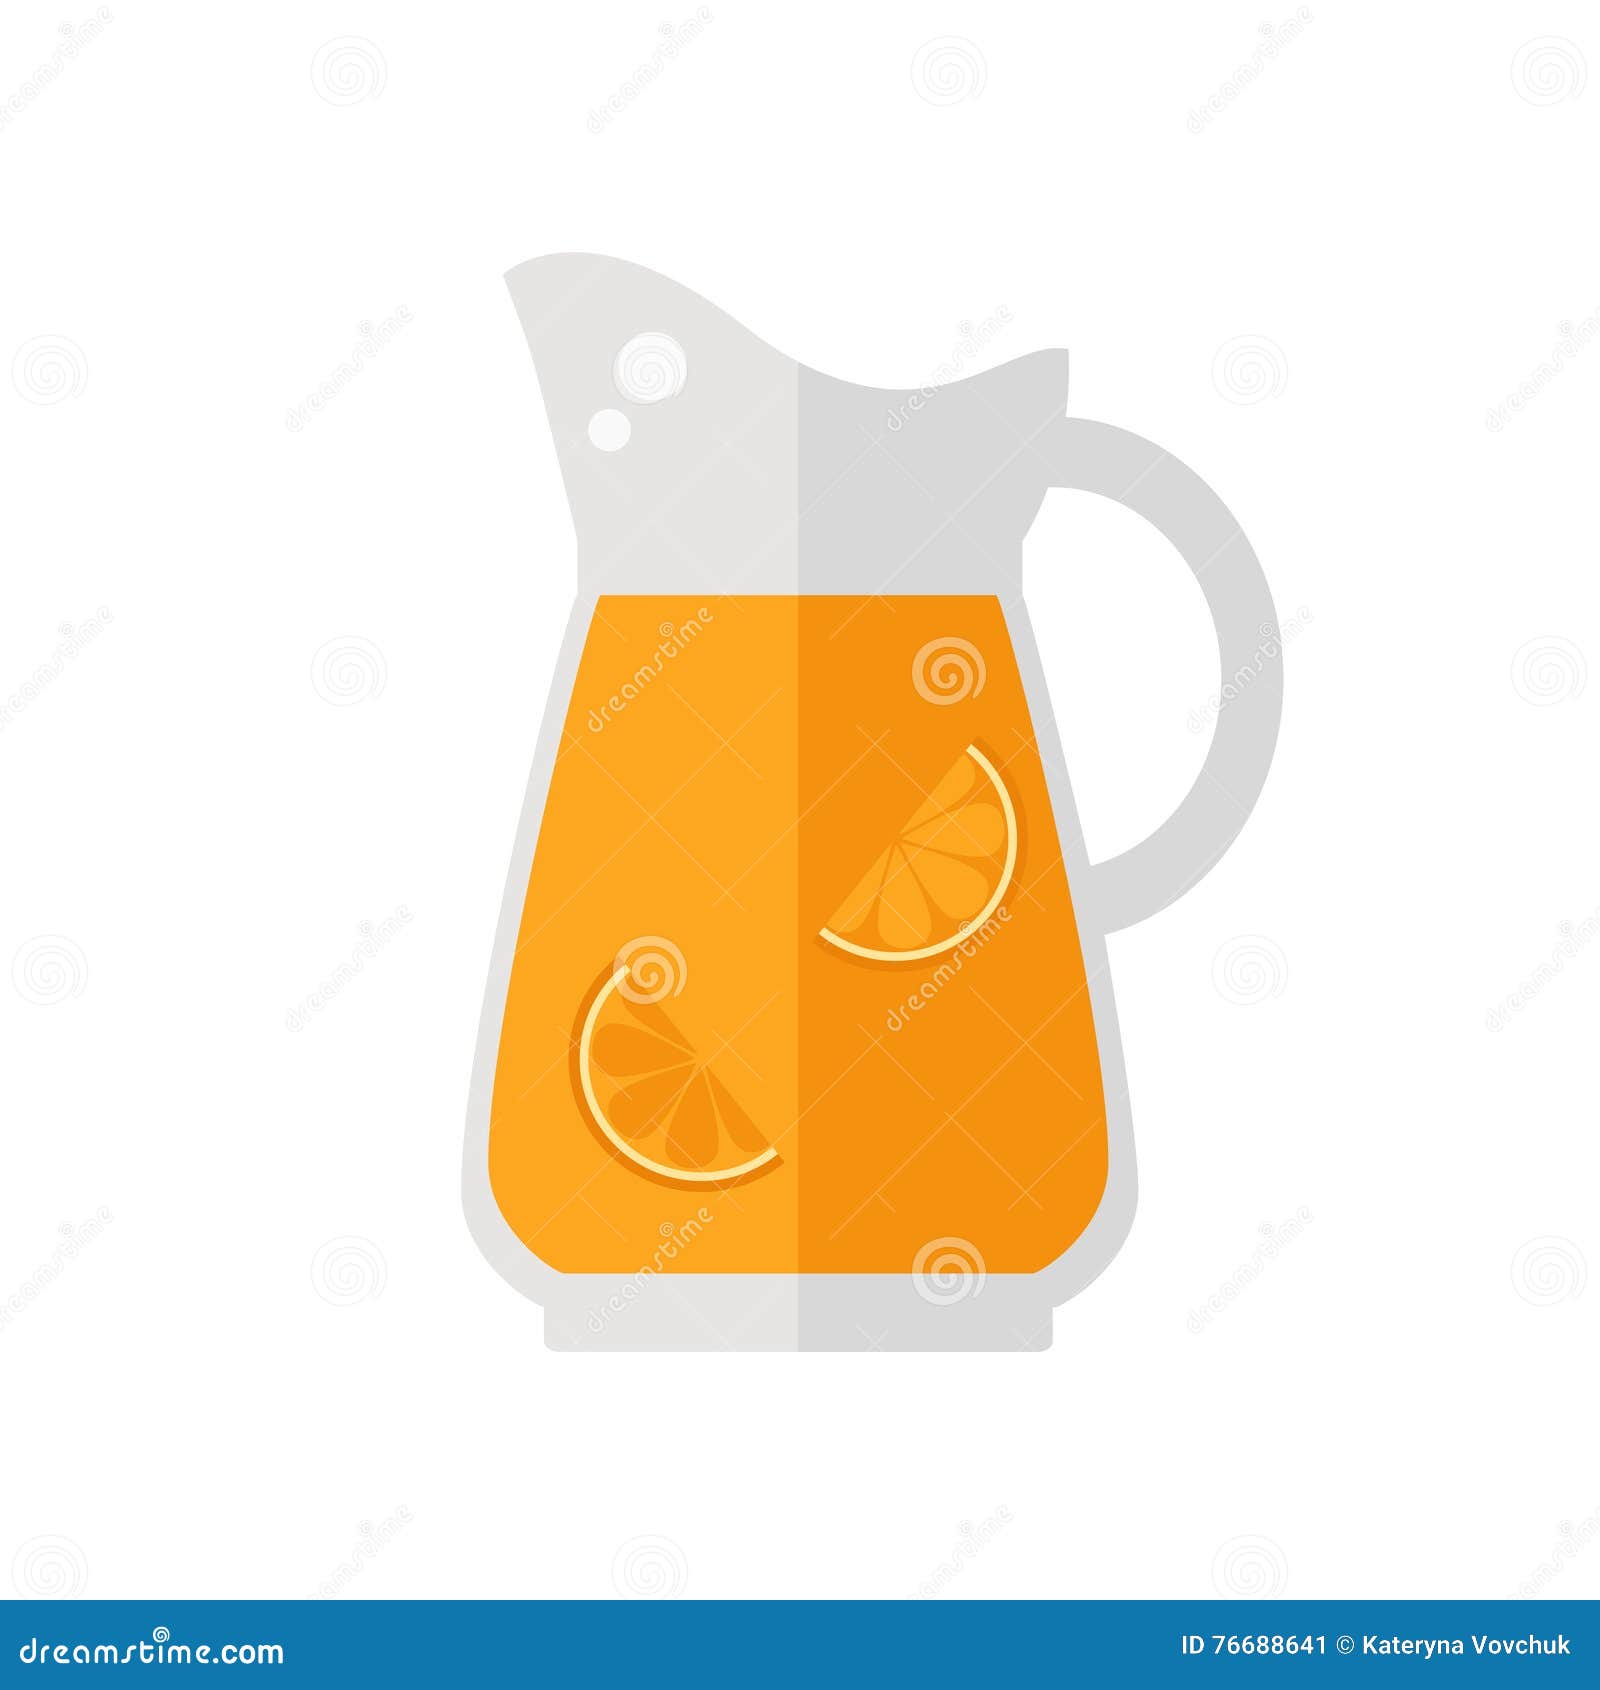 https://thumbs.dreamstime.com/z/juice-jug-icon-orange-isolated-white-background-healthy-drink-flat-style-vector-illustration-76688641.jpg